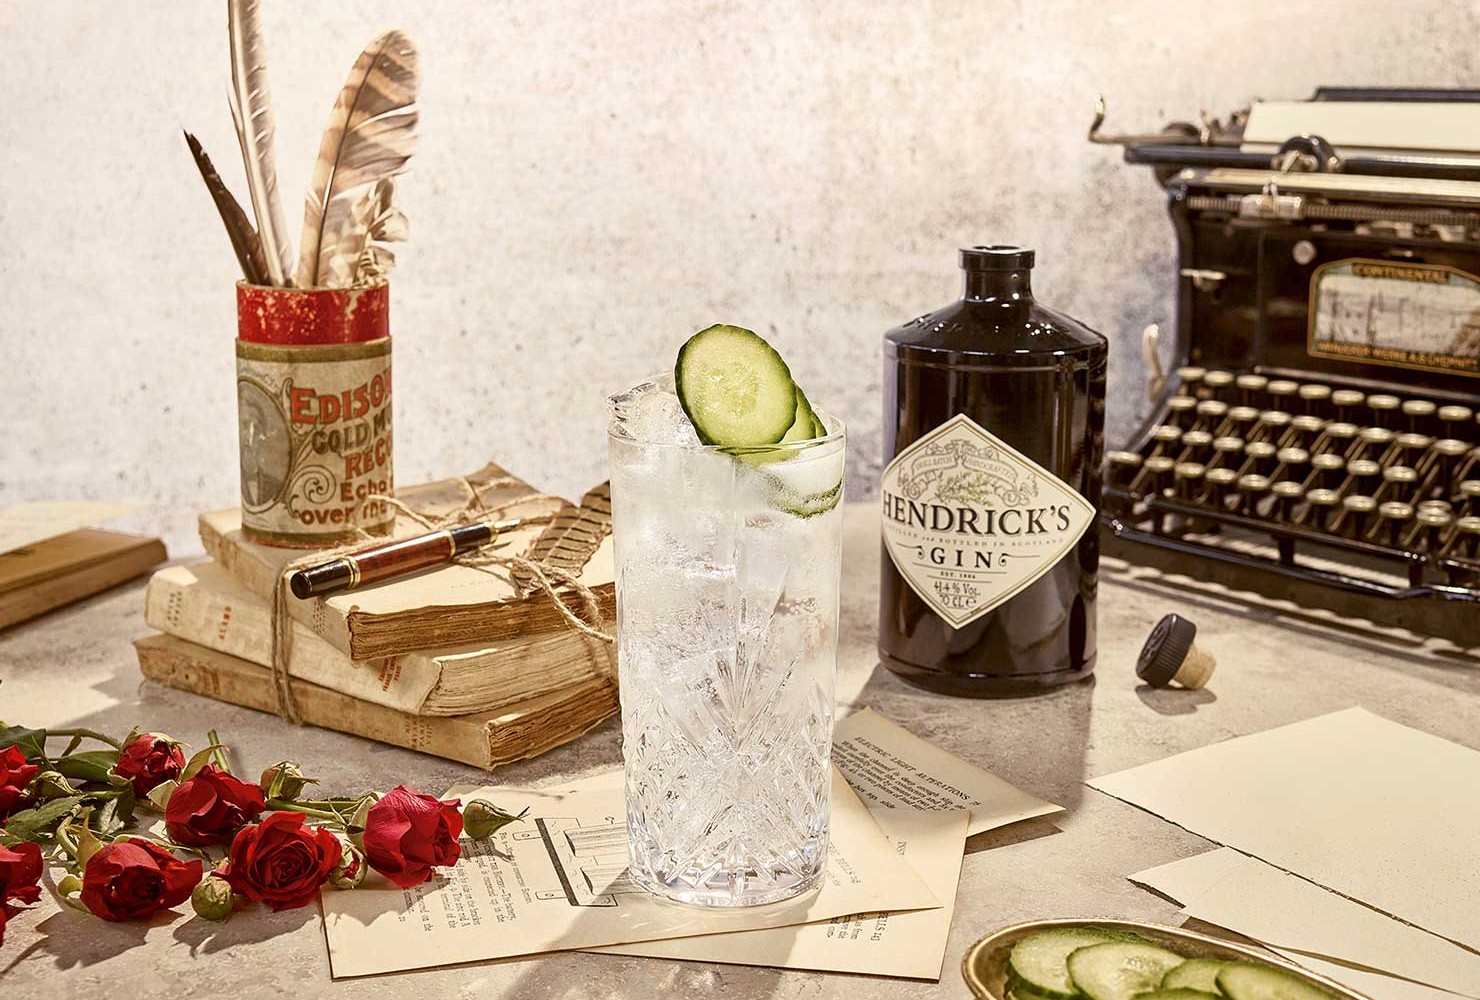 Hendrick’s Gin & Tonic cocktail served with a cucumber garnish